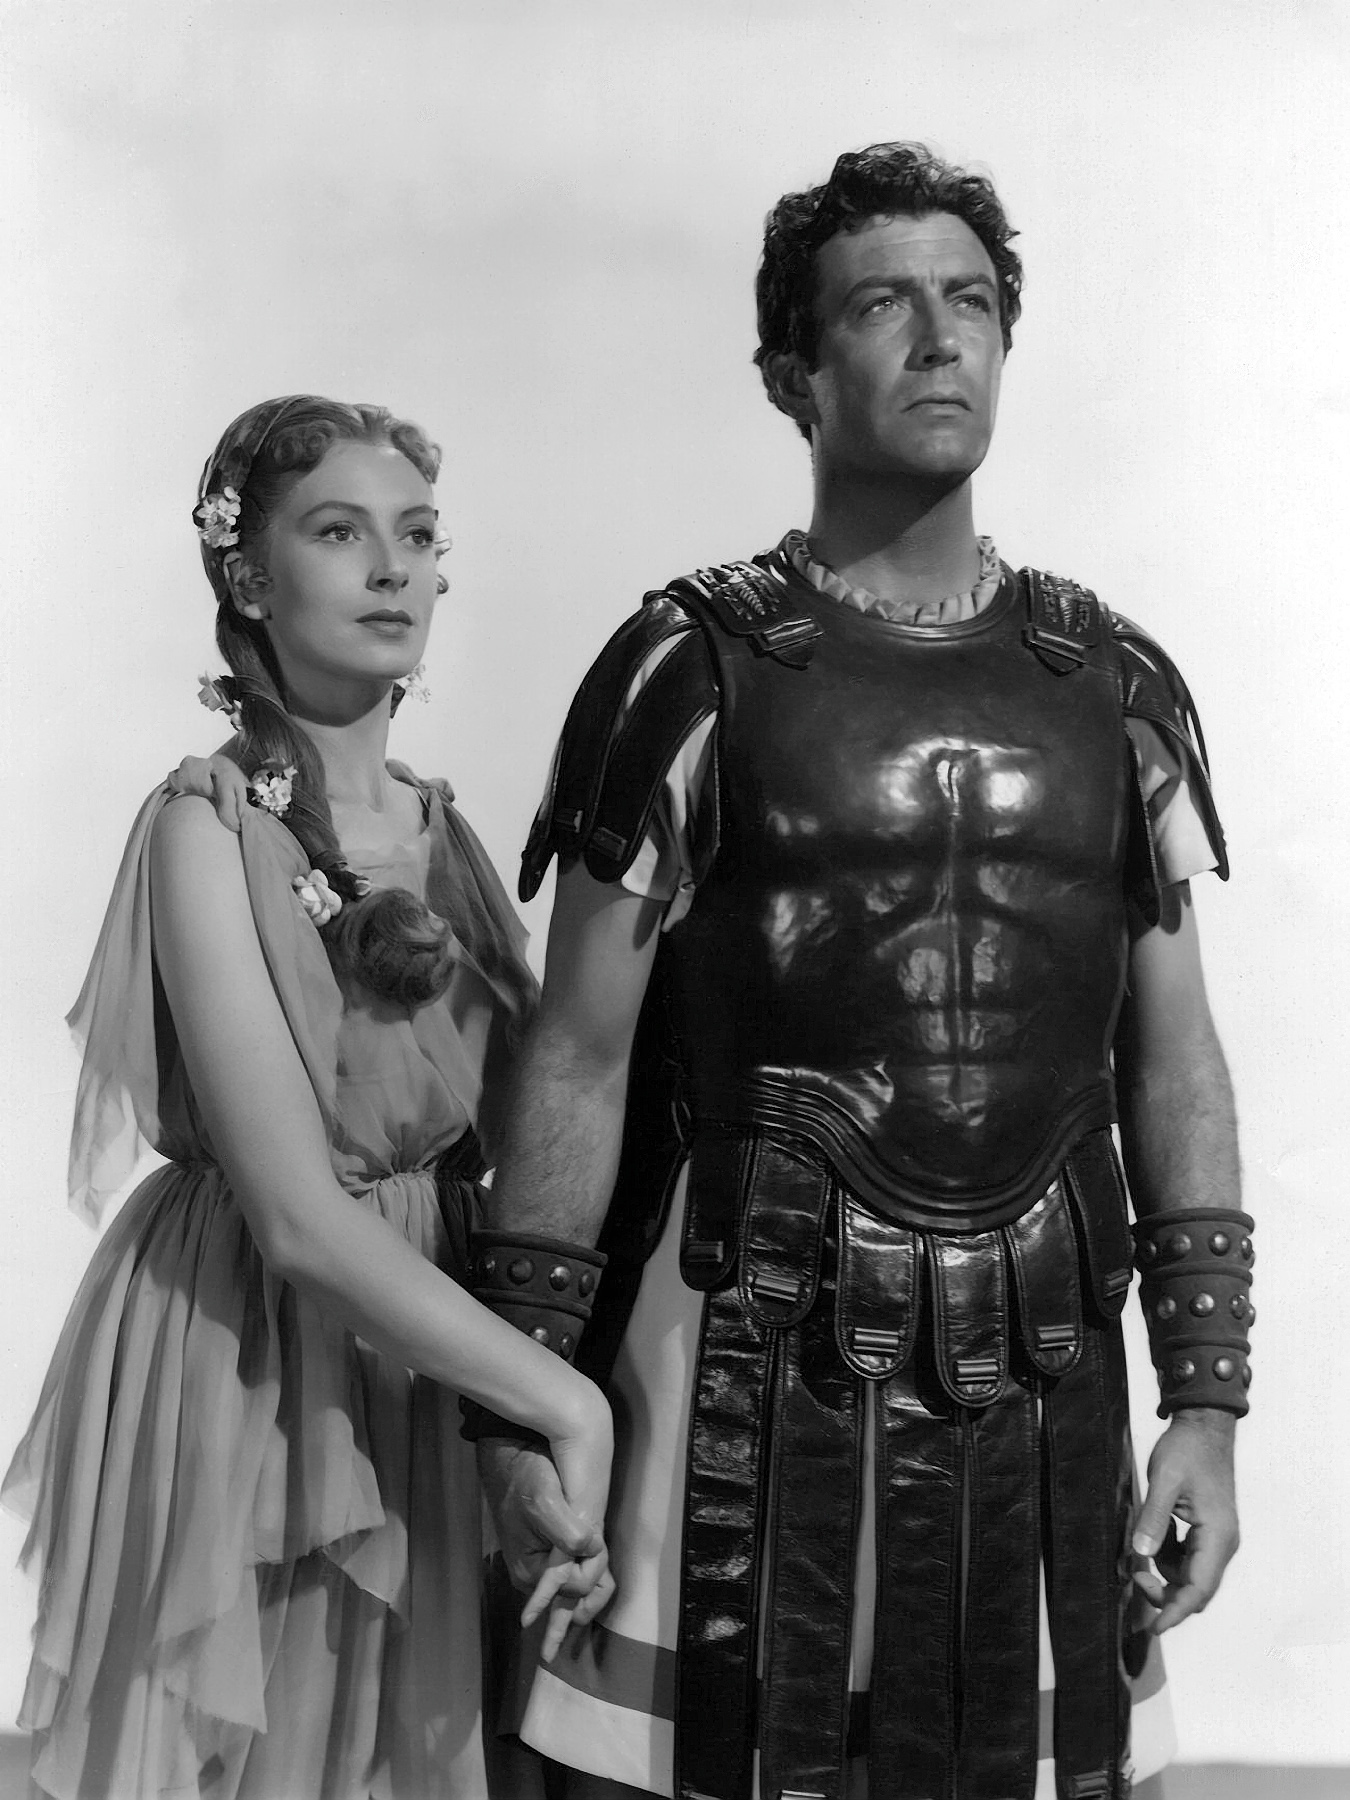 Quo Vadis, 1951, Is Playing on TCM on February 18 (USA)